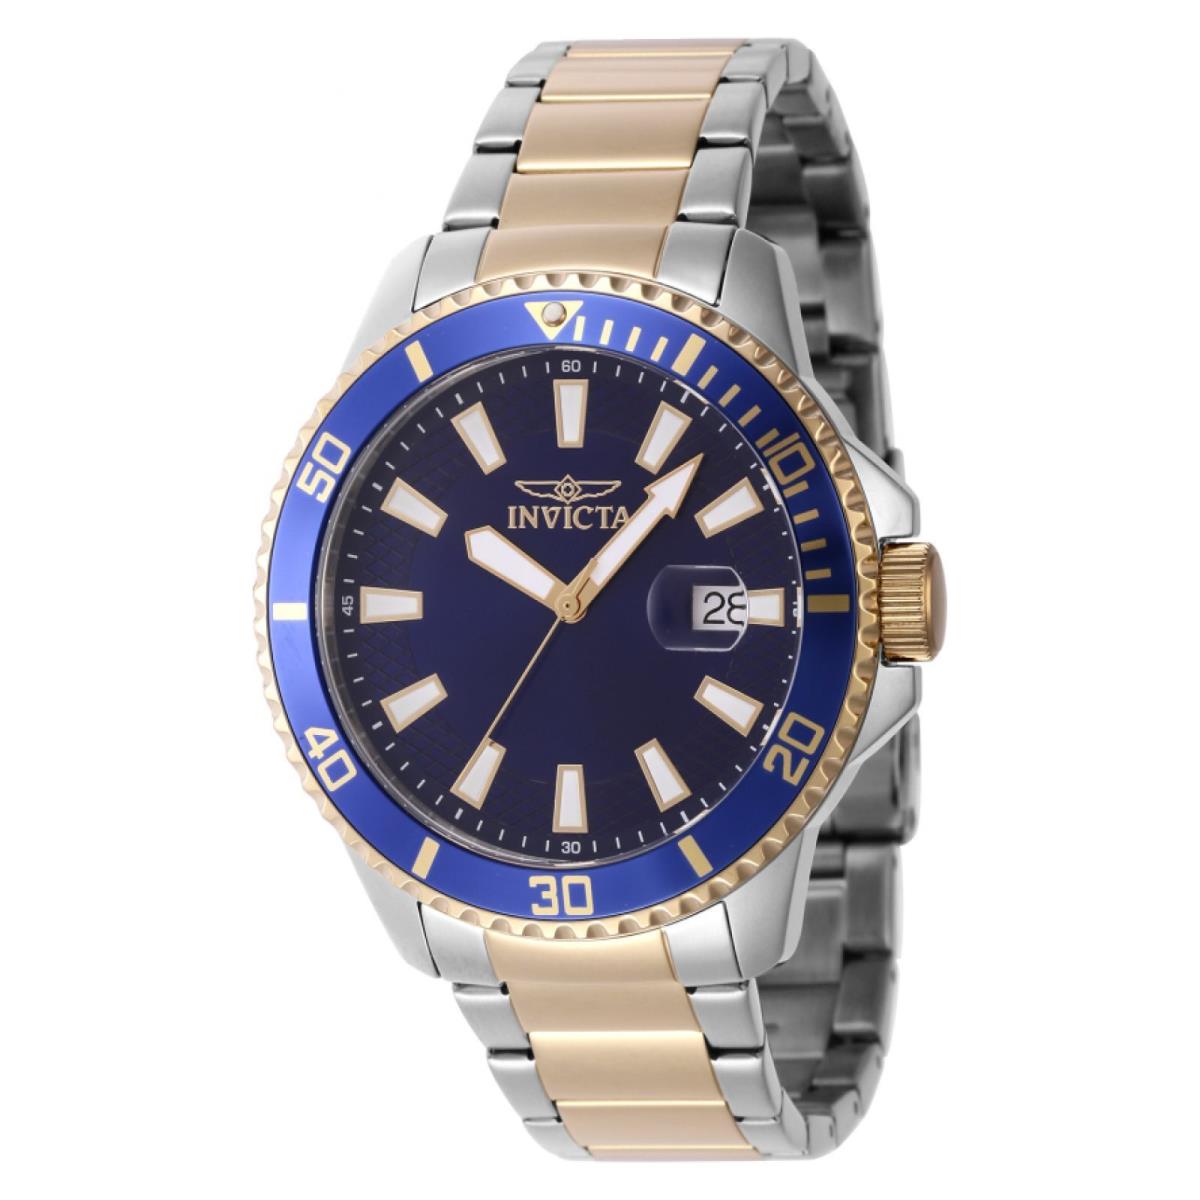 Watch Invicta 46142 Pro Diver Men 45 mm Stainless Steel